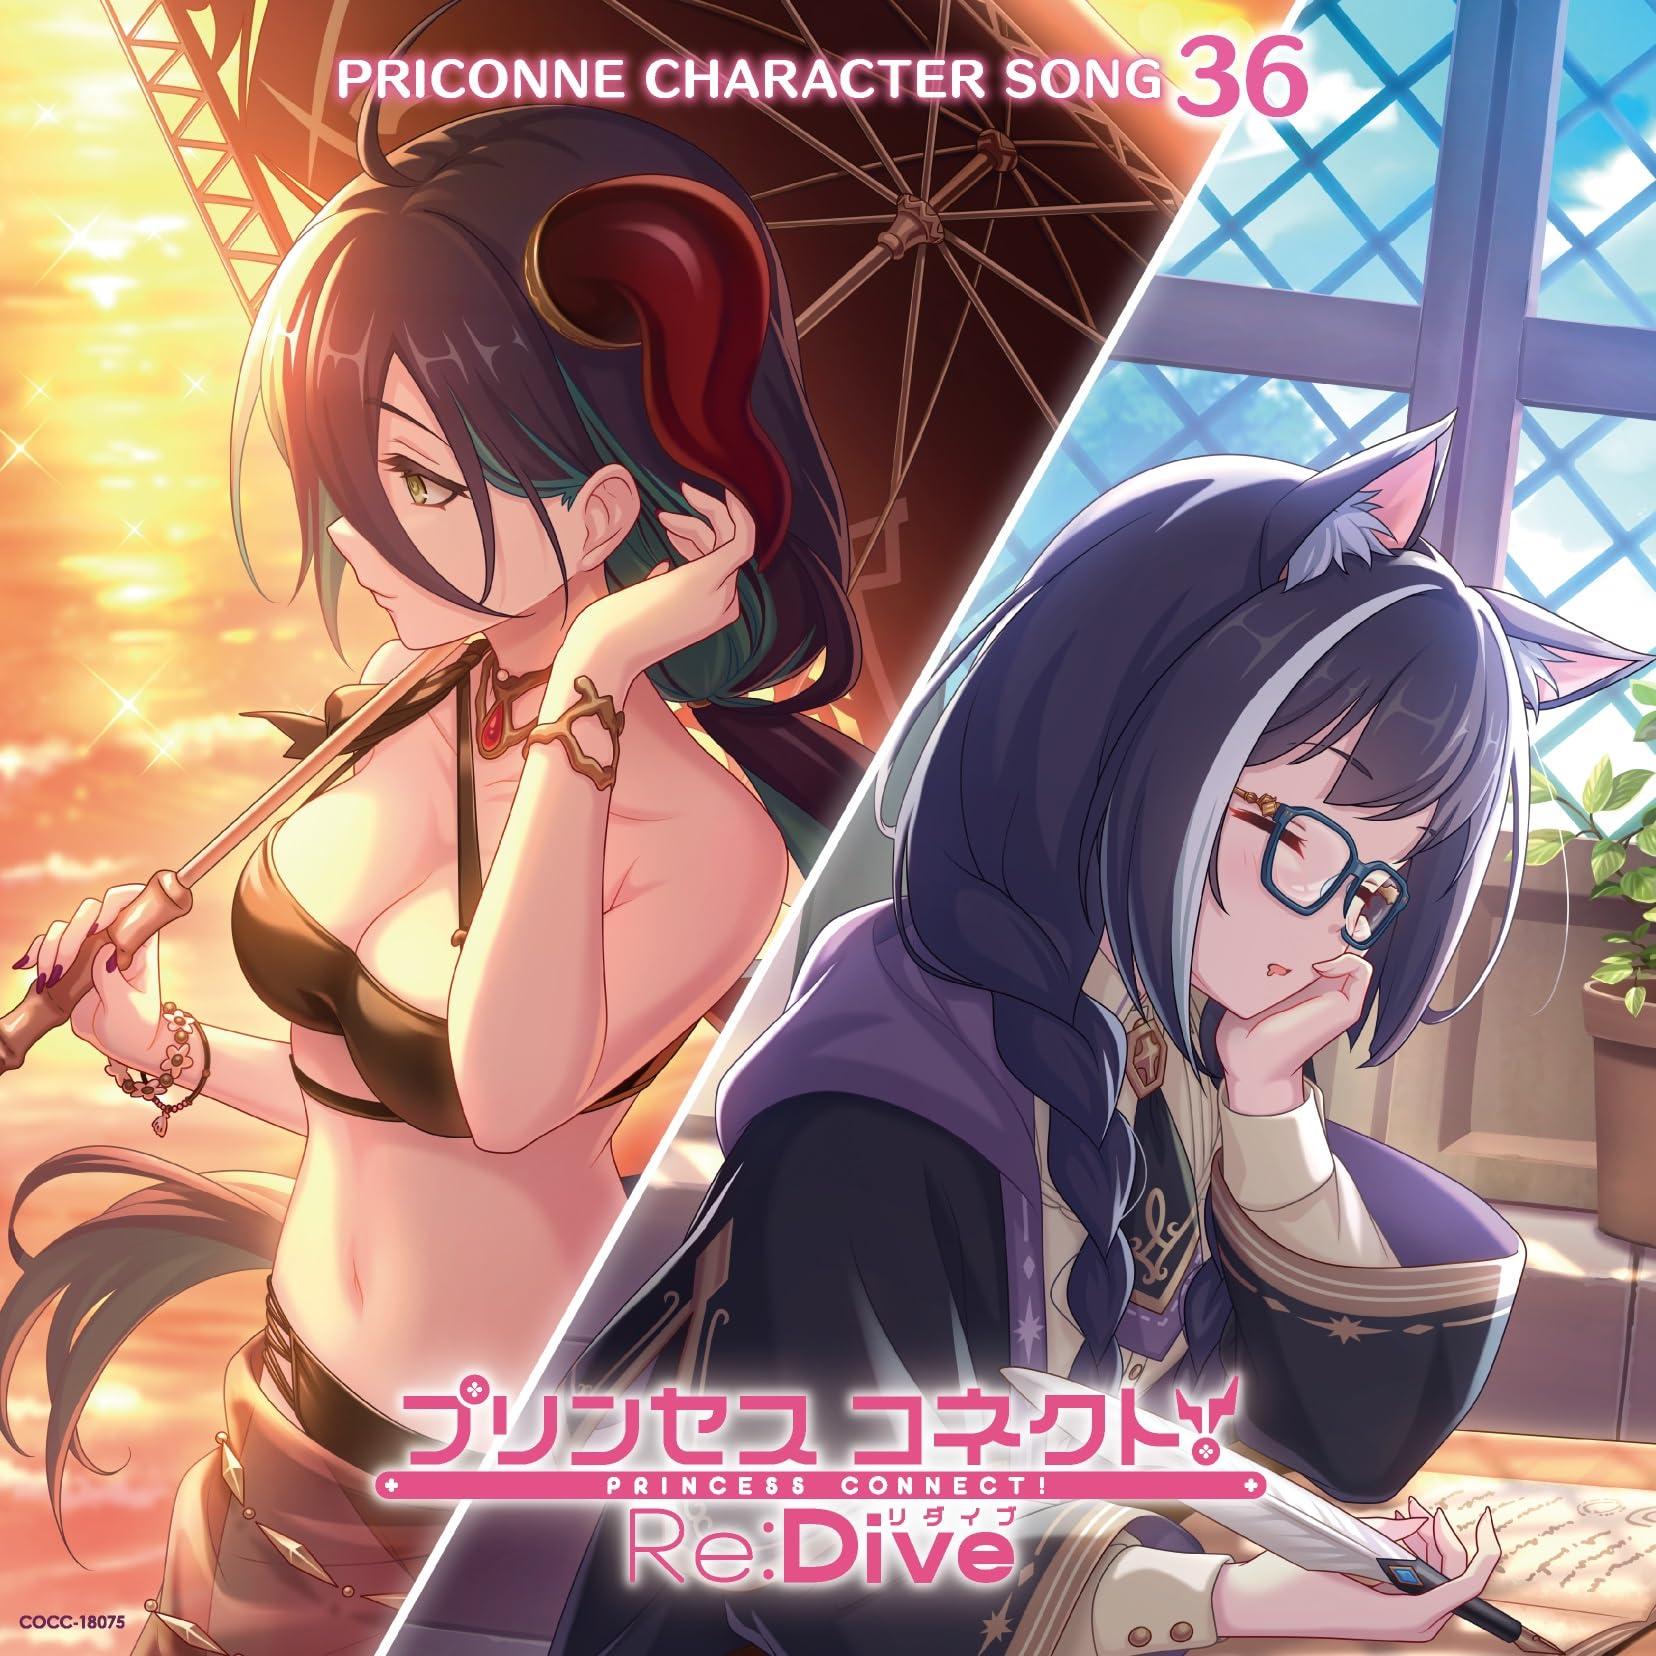 Princess Connect! Re:Dive Priconne Character Song 36